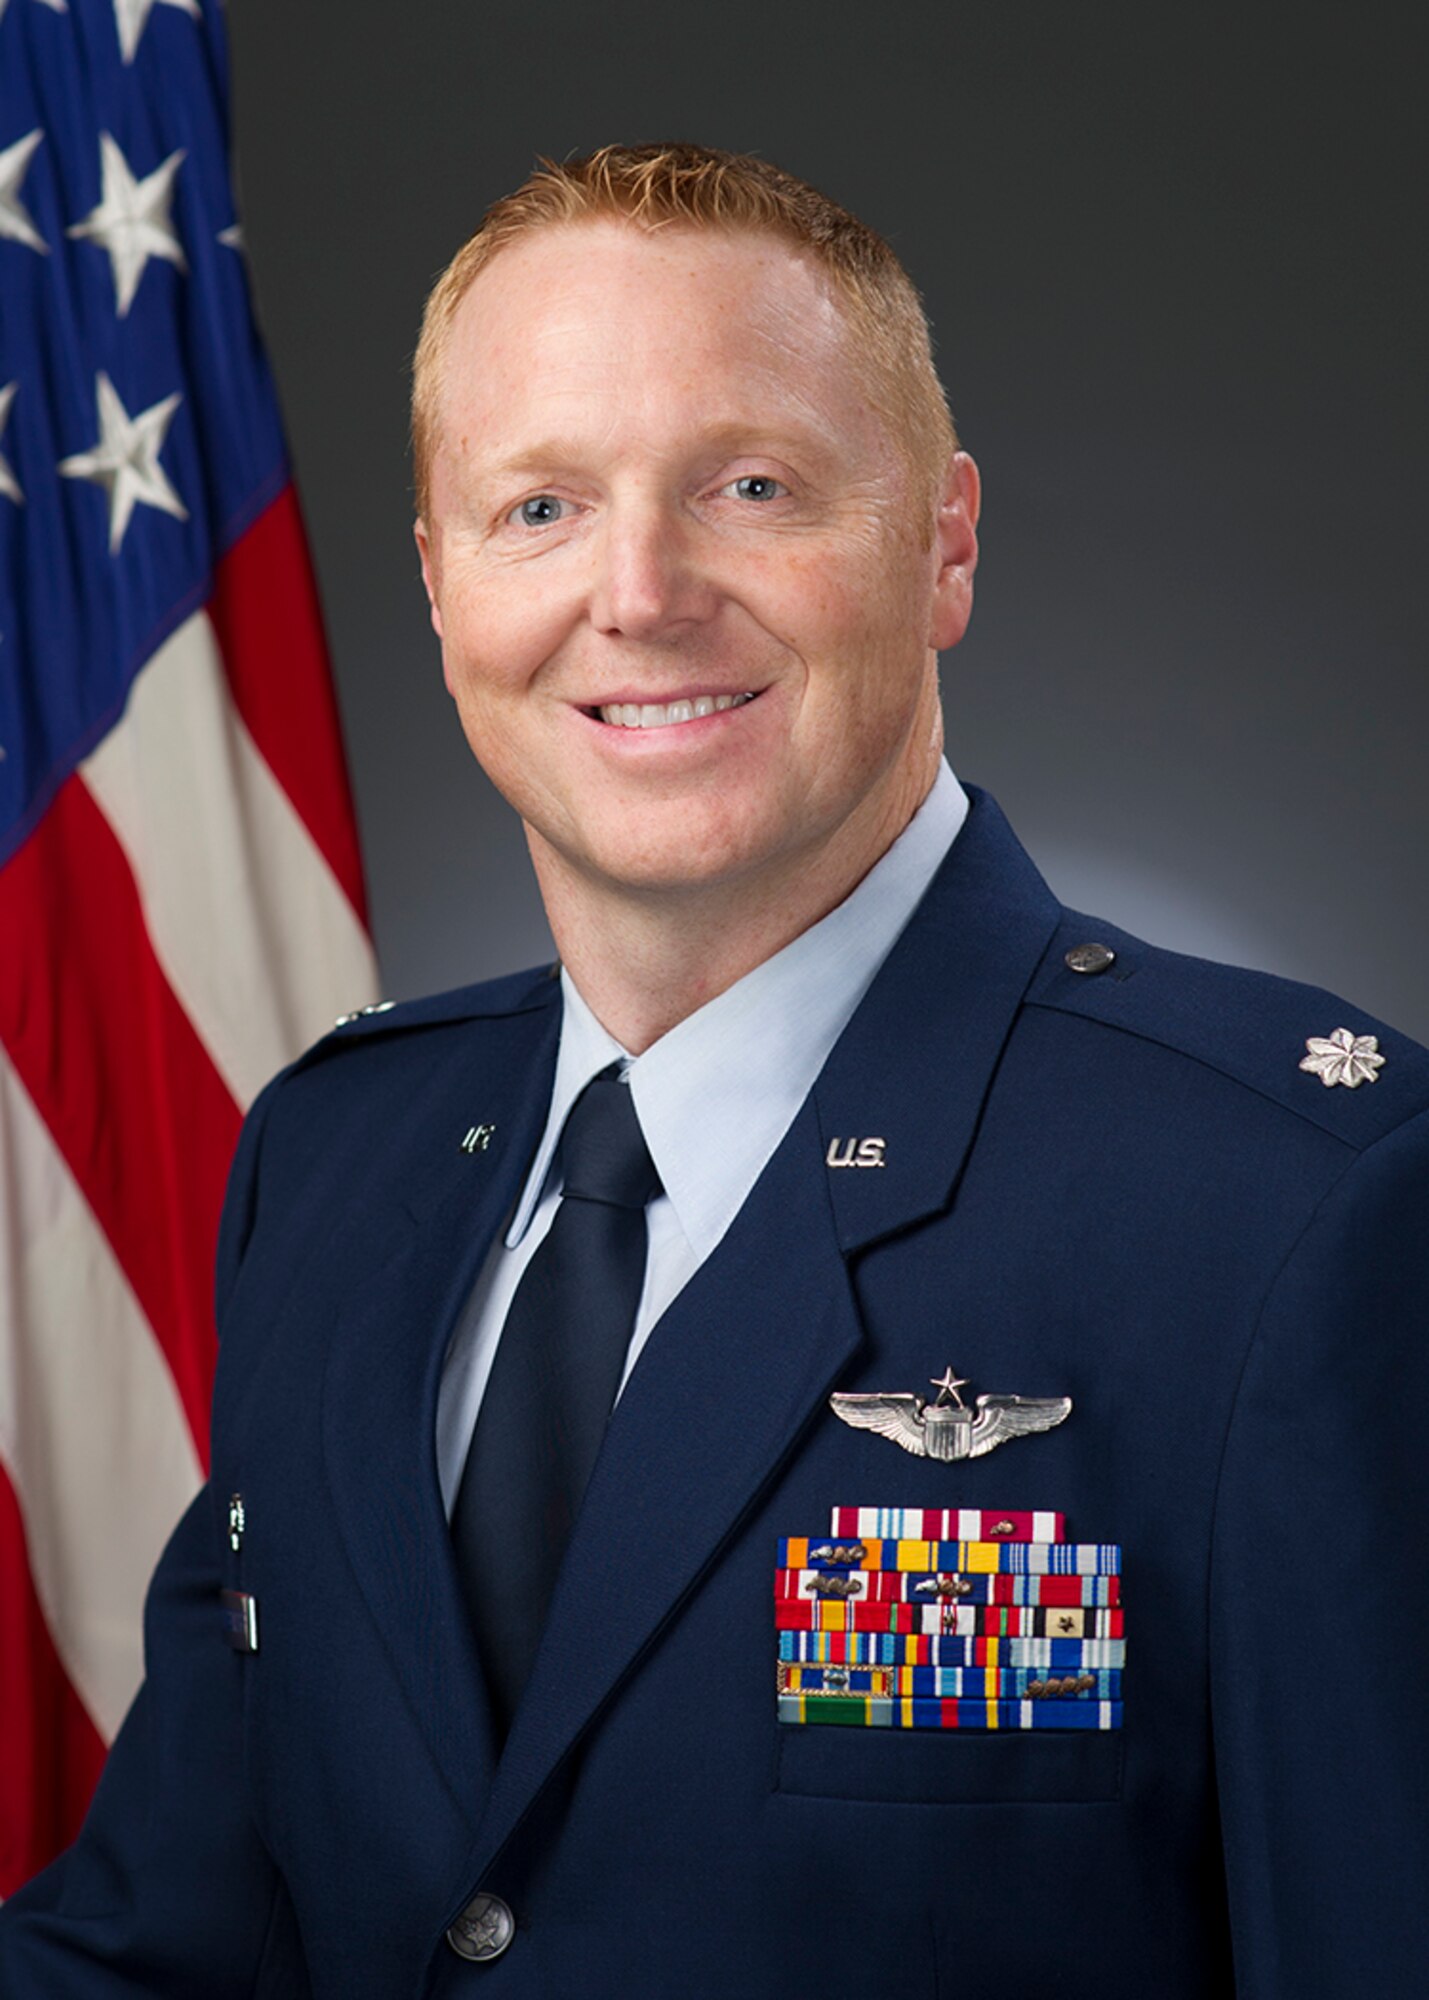 Lt. Col. Jesper Stubbendorff, 9th Aerial Refueling Squadron commander, shares some thoughts on how Airmen can learn through failure. (Courtesy Photo)